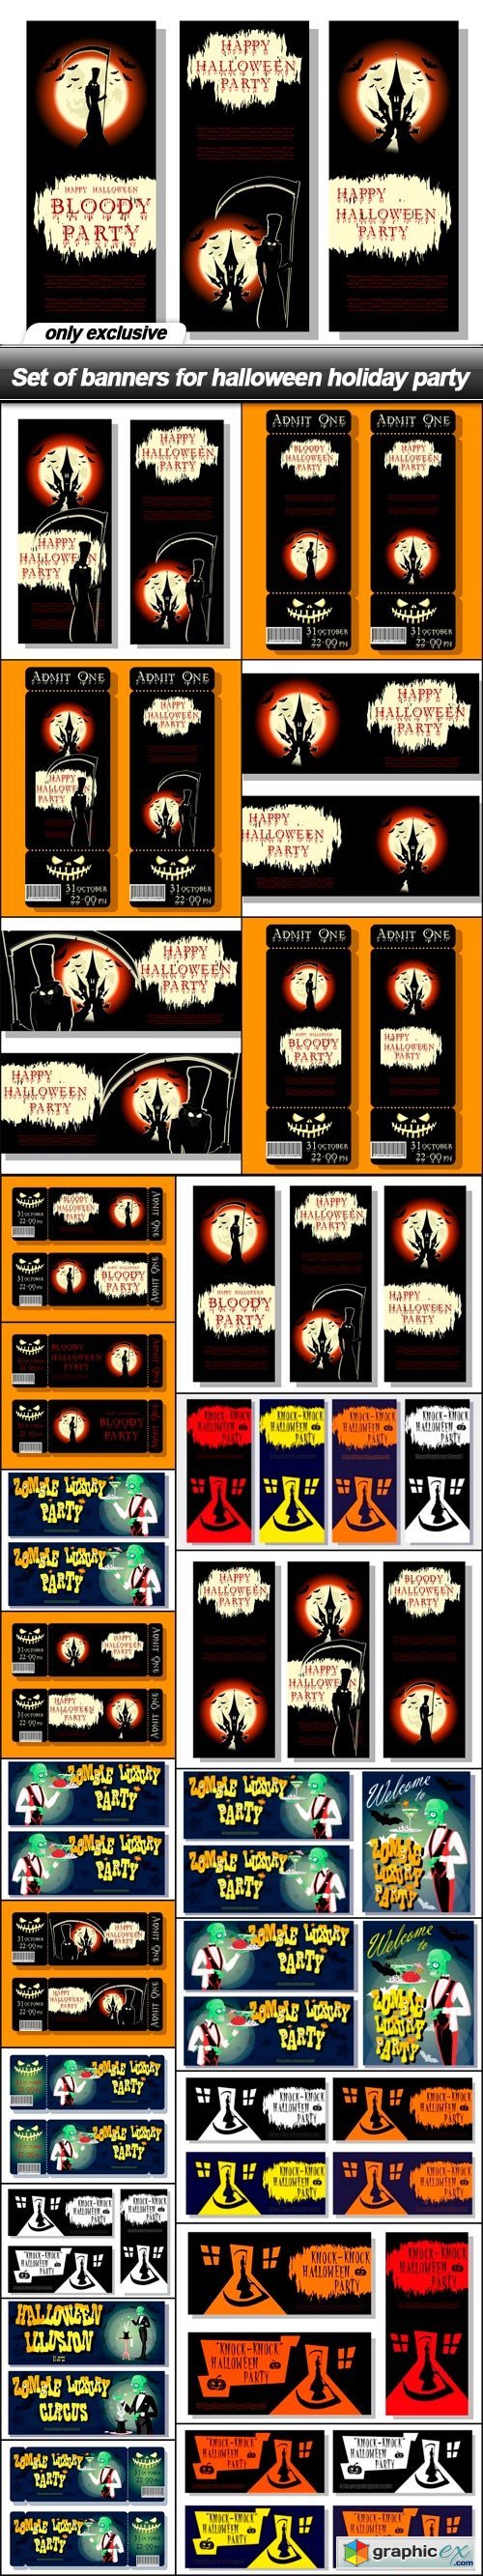 Set of banners for halloween holiday party - 24 EPS